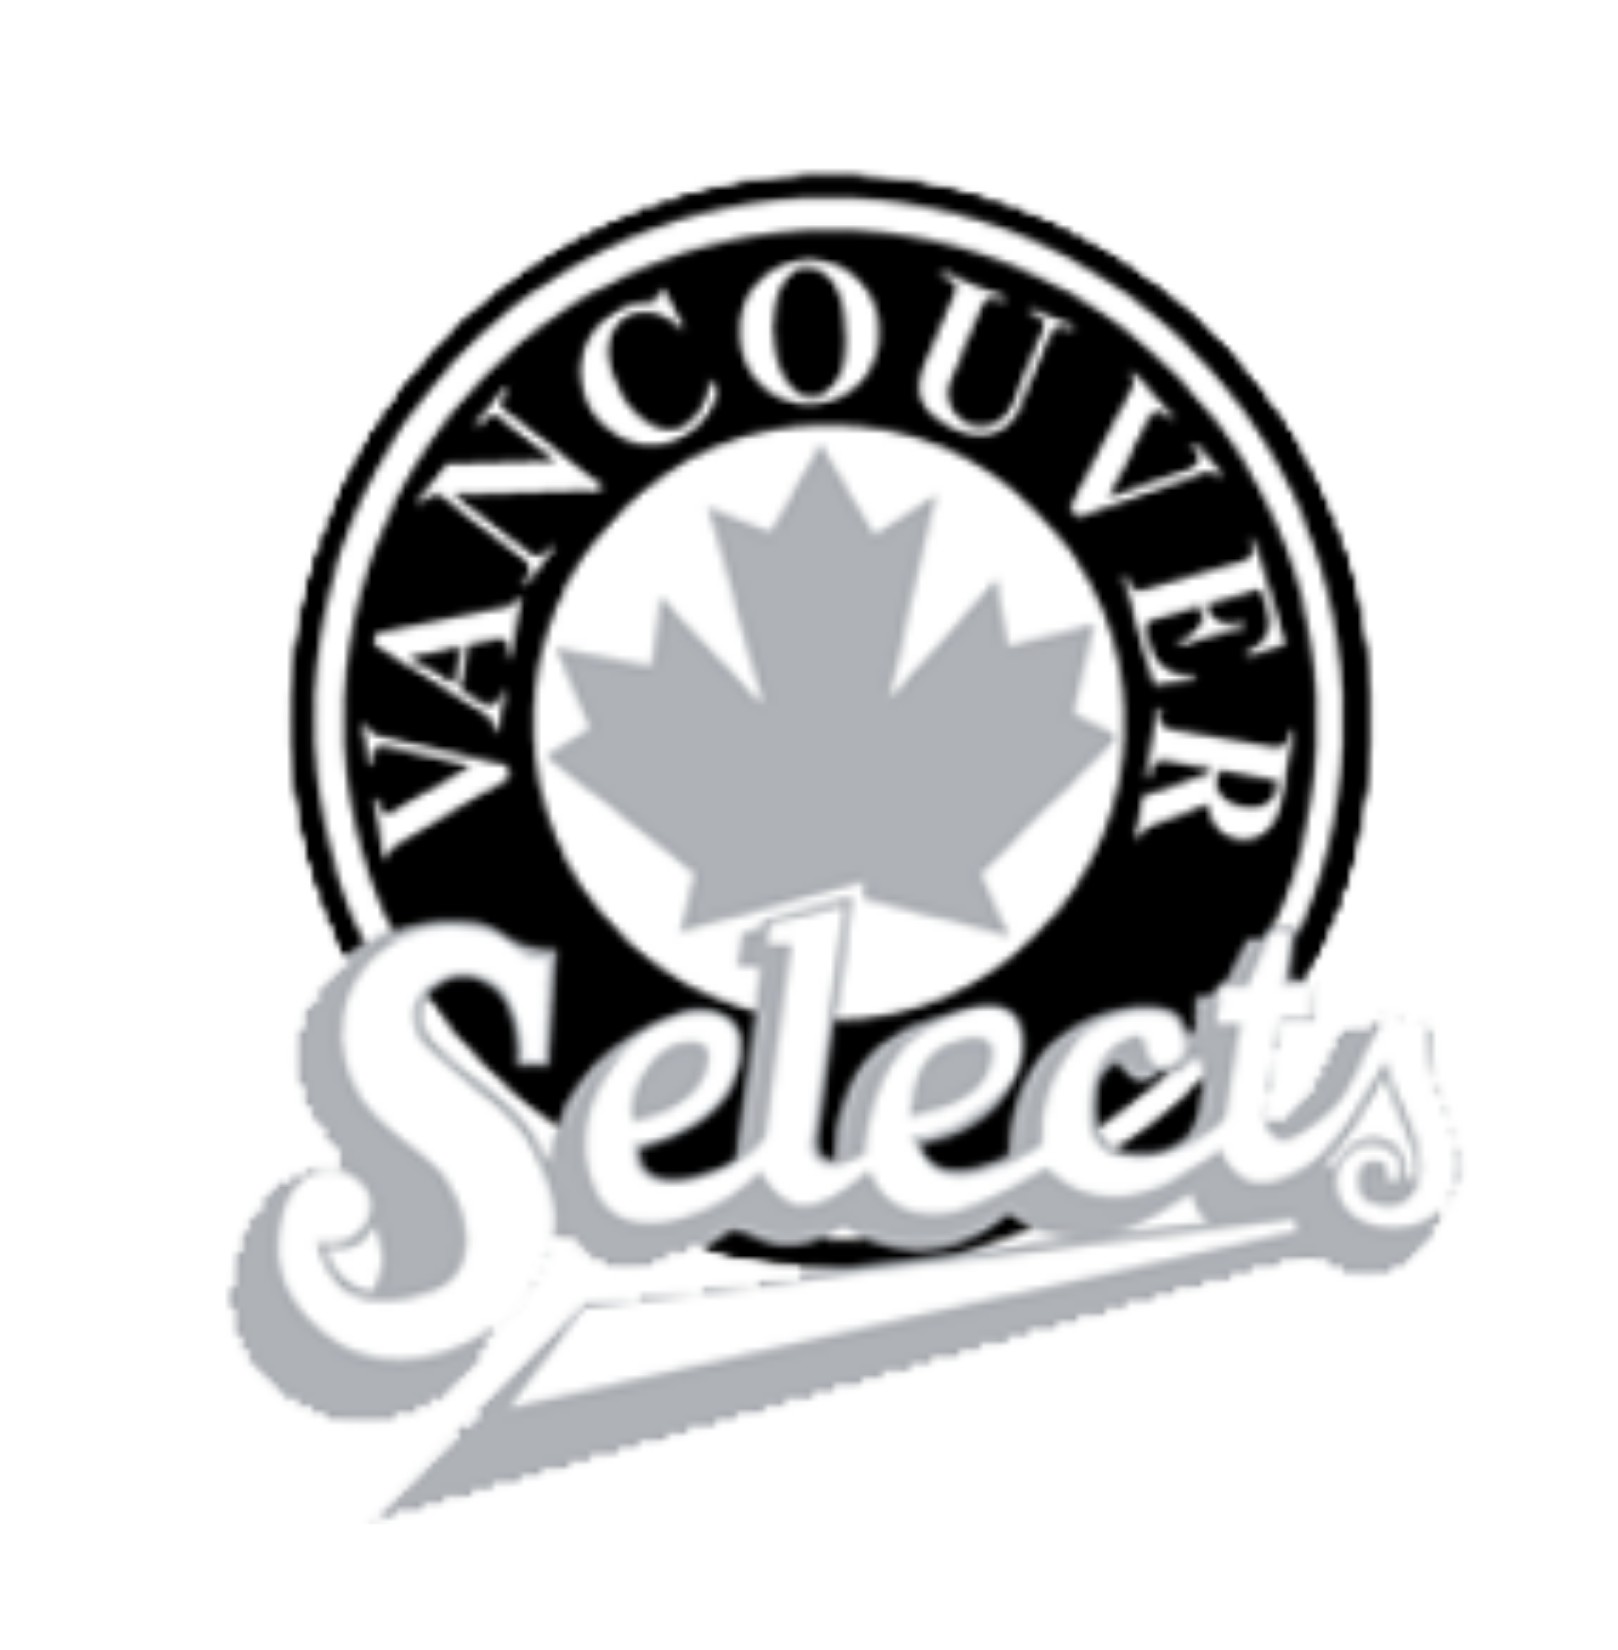 2008 Vancouver Selects Black